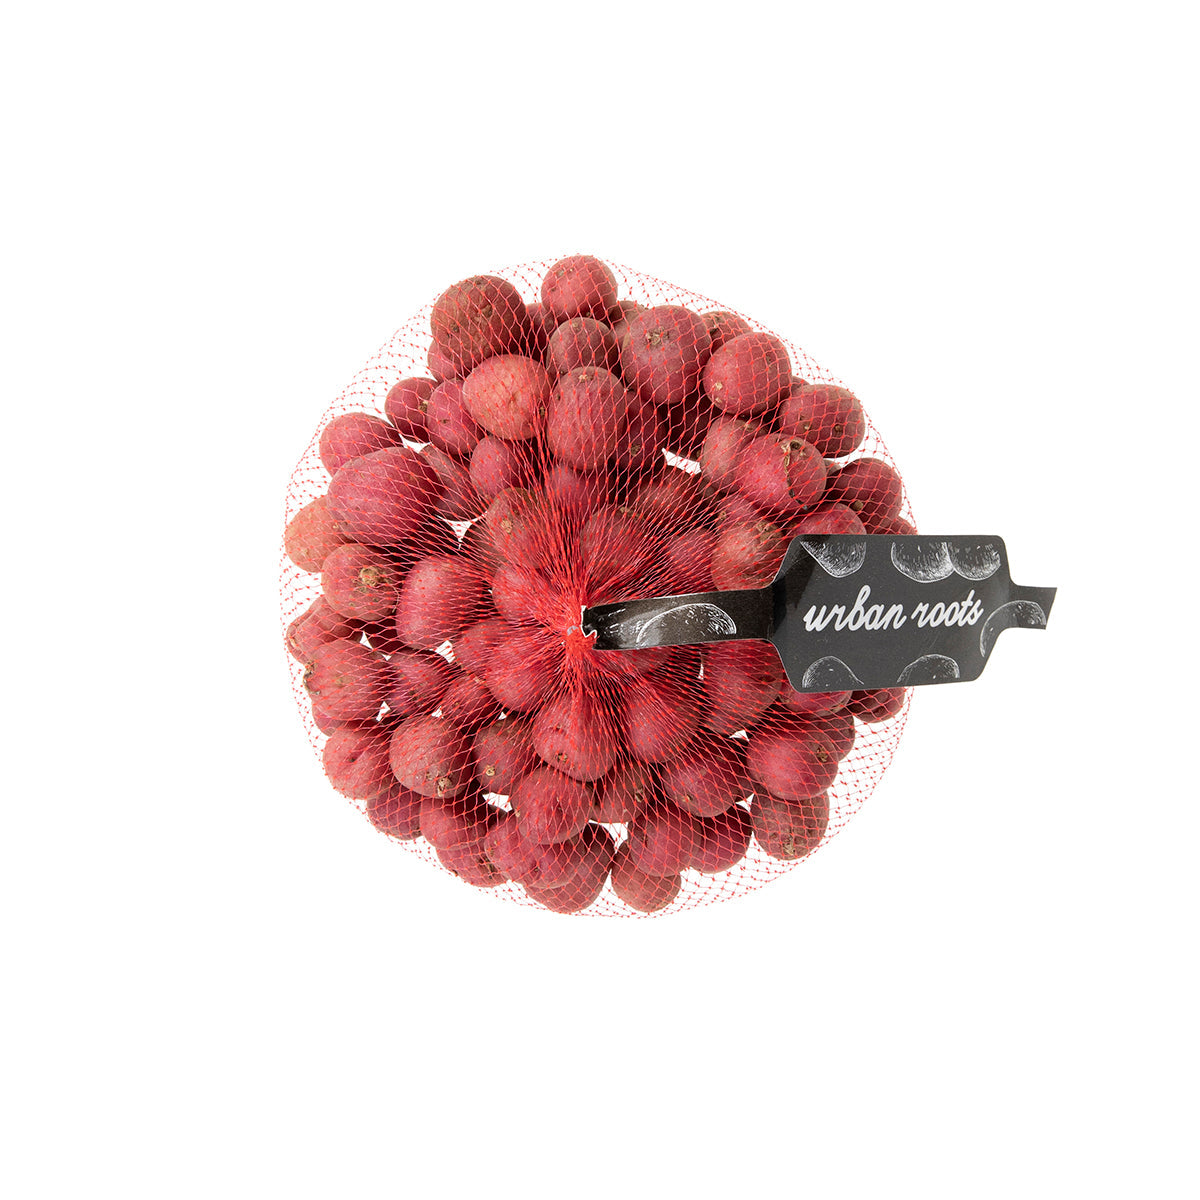 Urban Roots Red Marble Potatoes 16 OZ